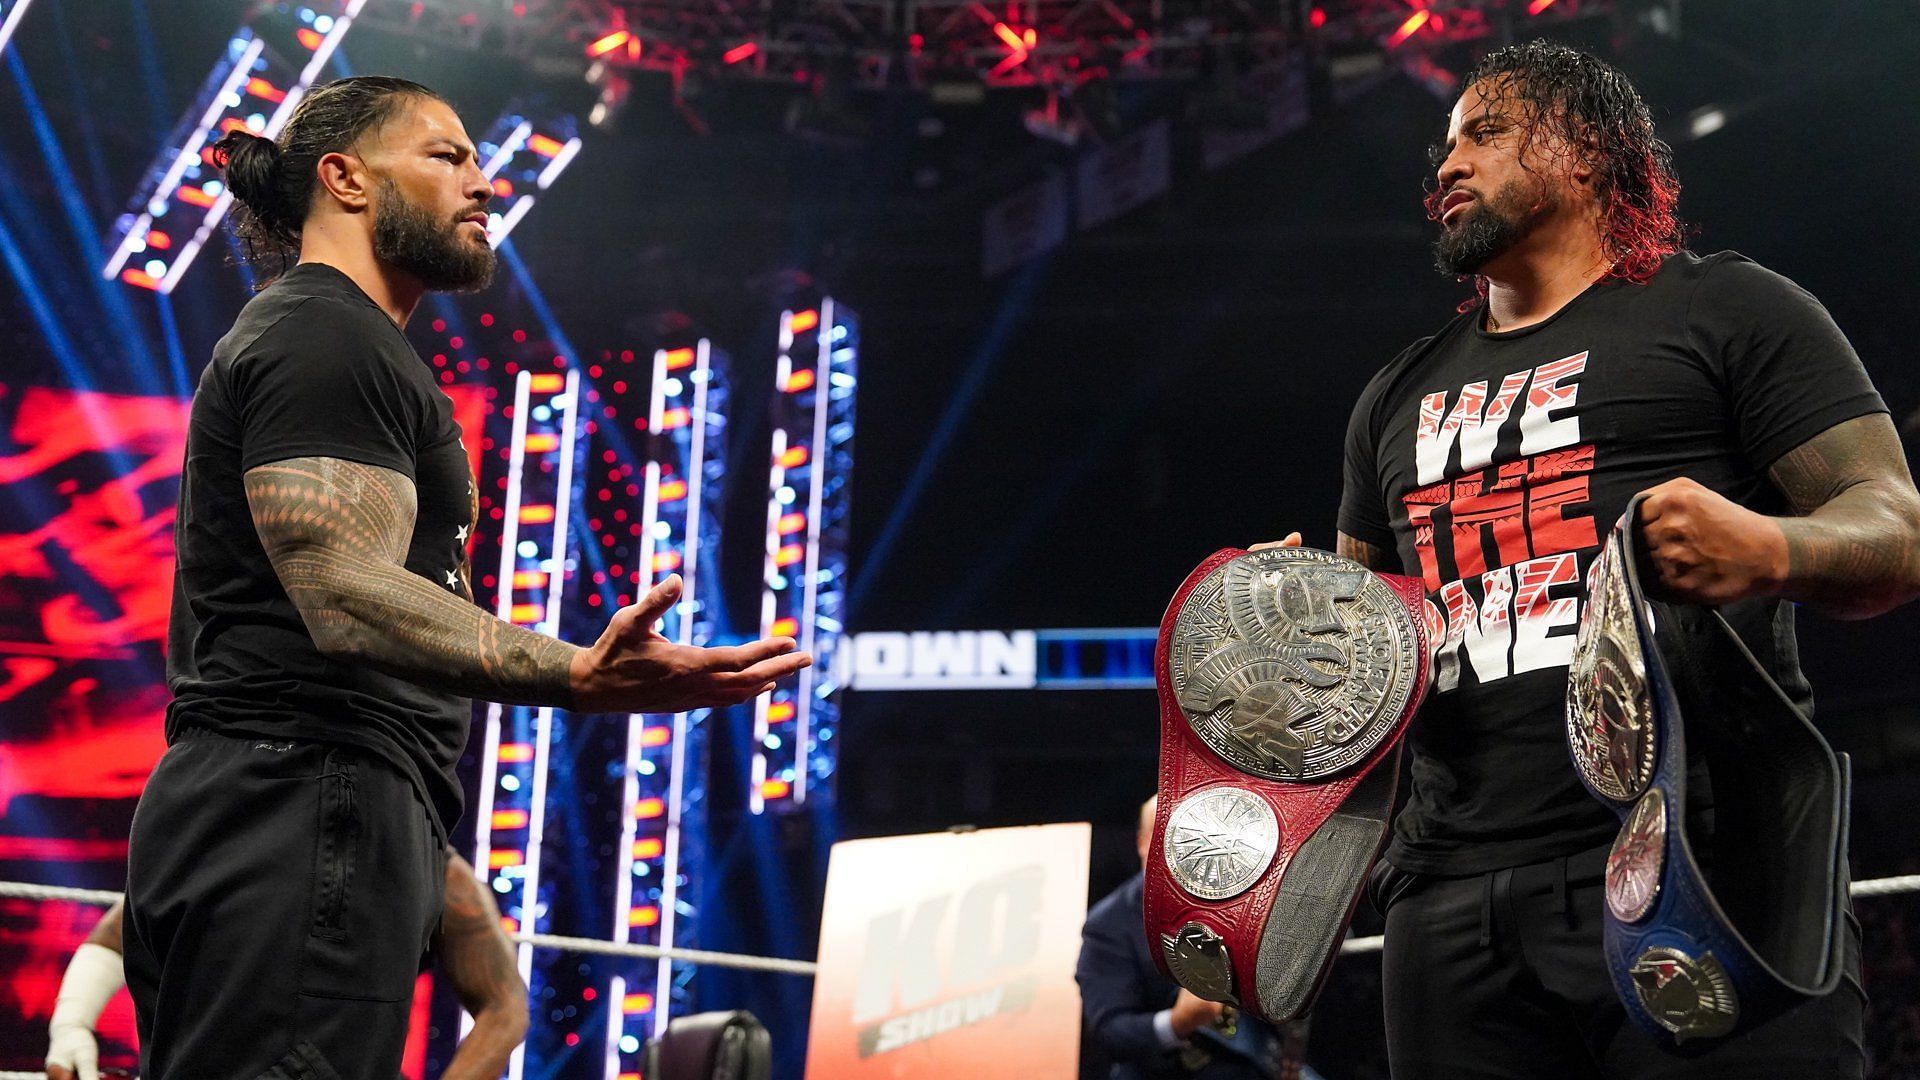 Jimmy Uso and Roman Reigns